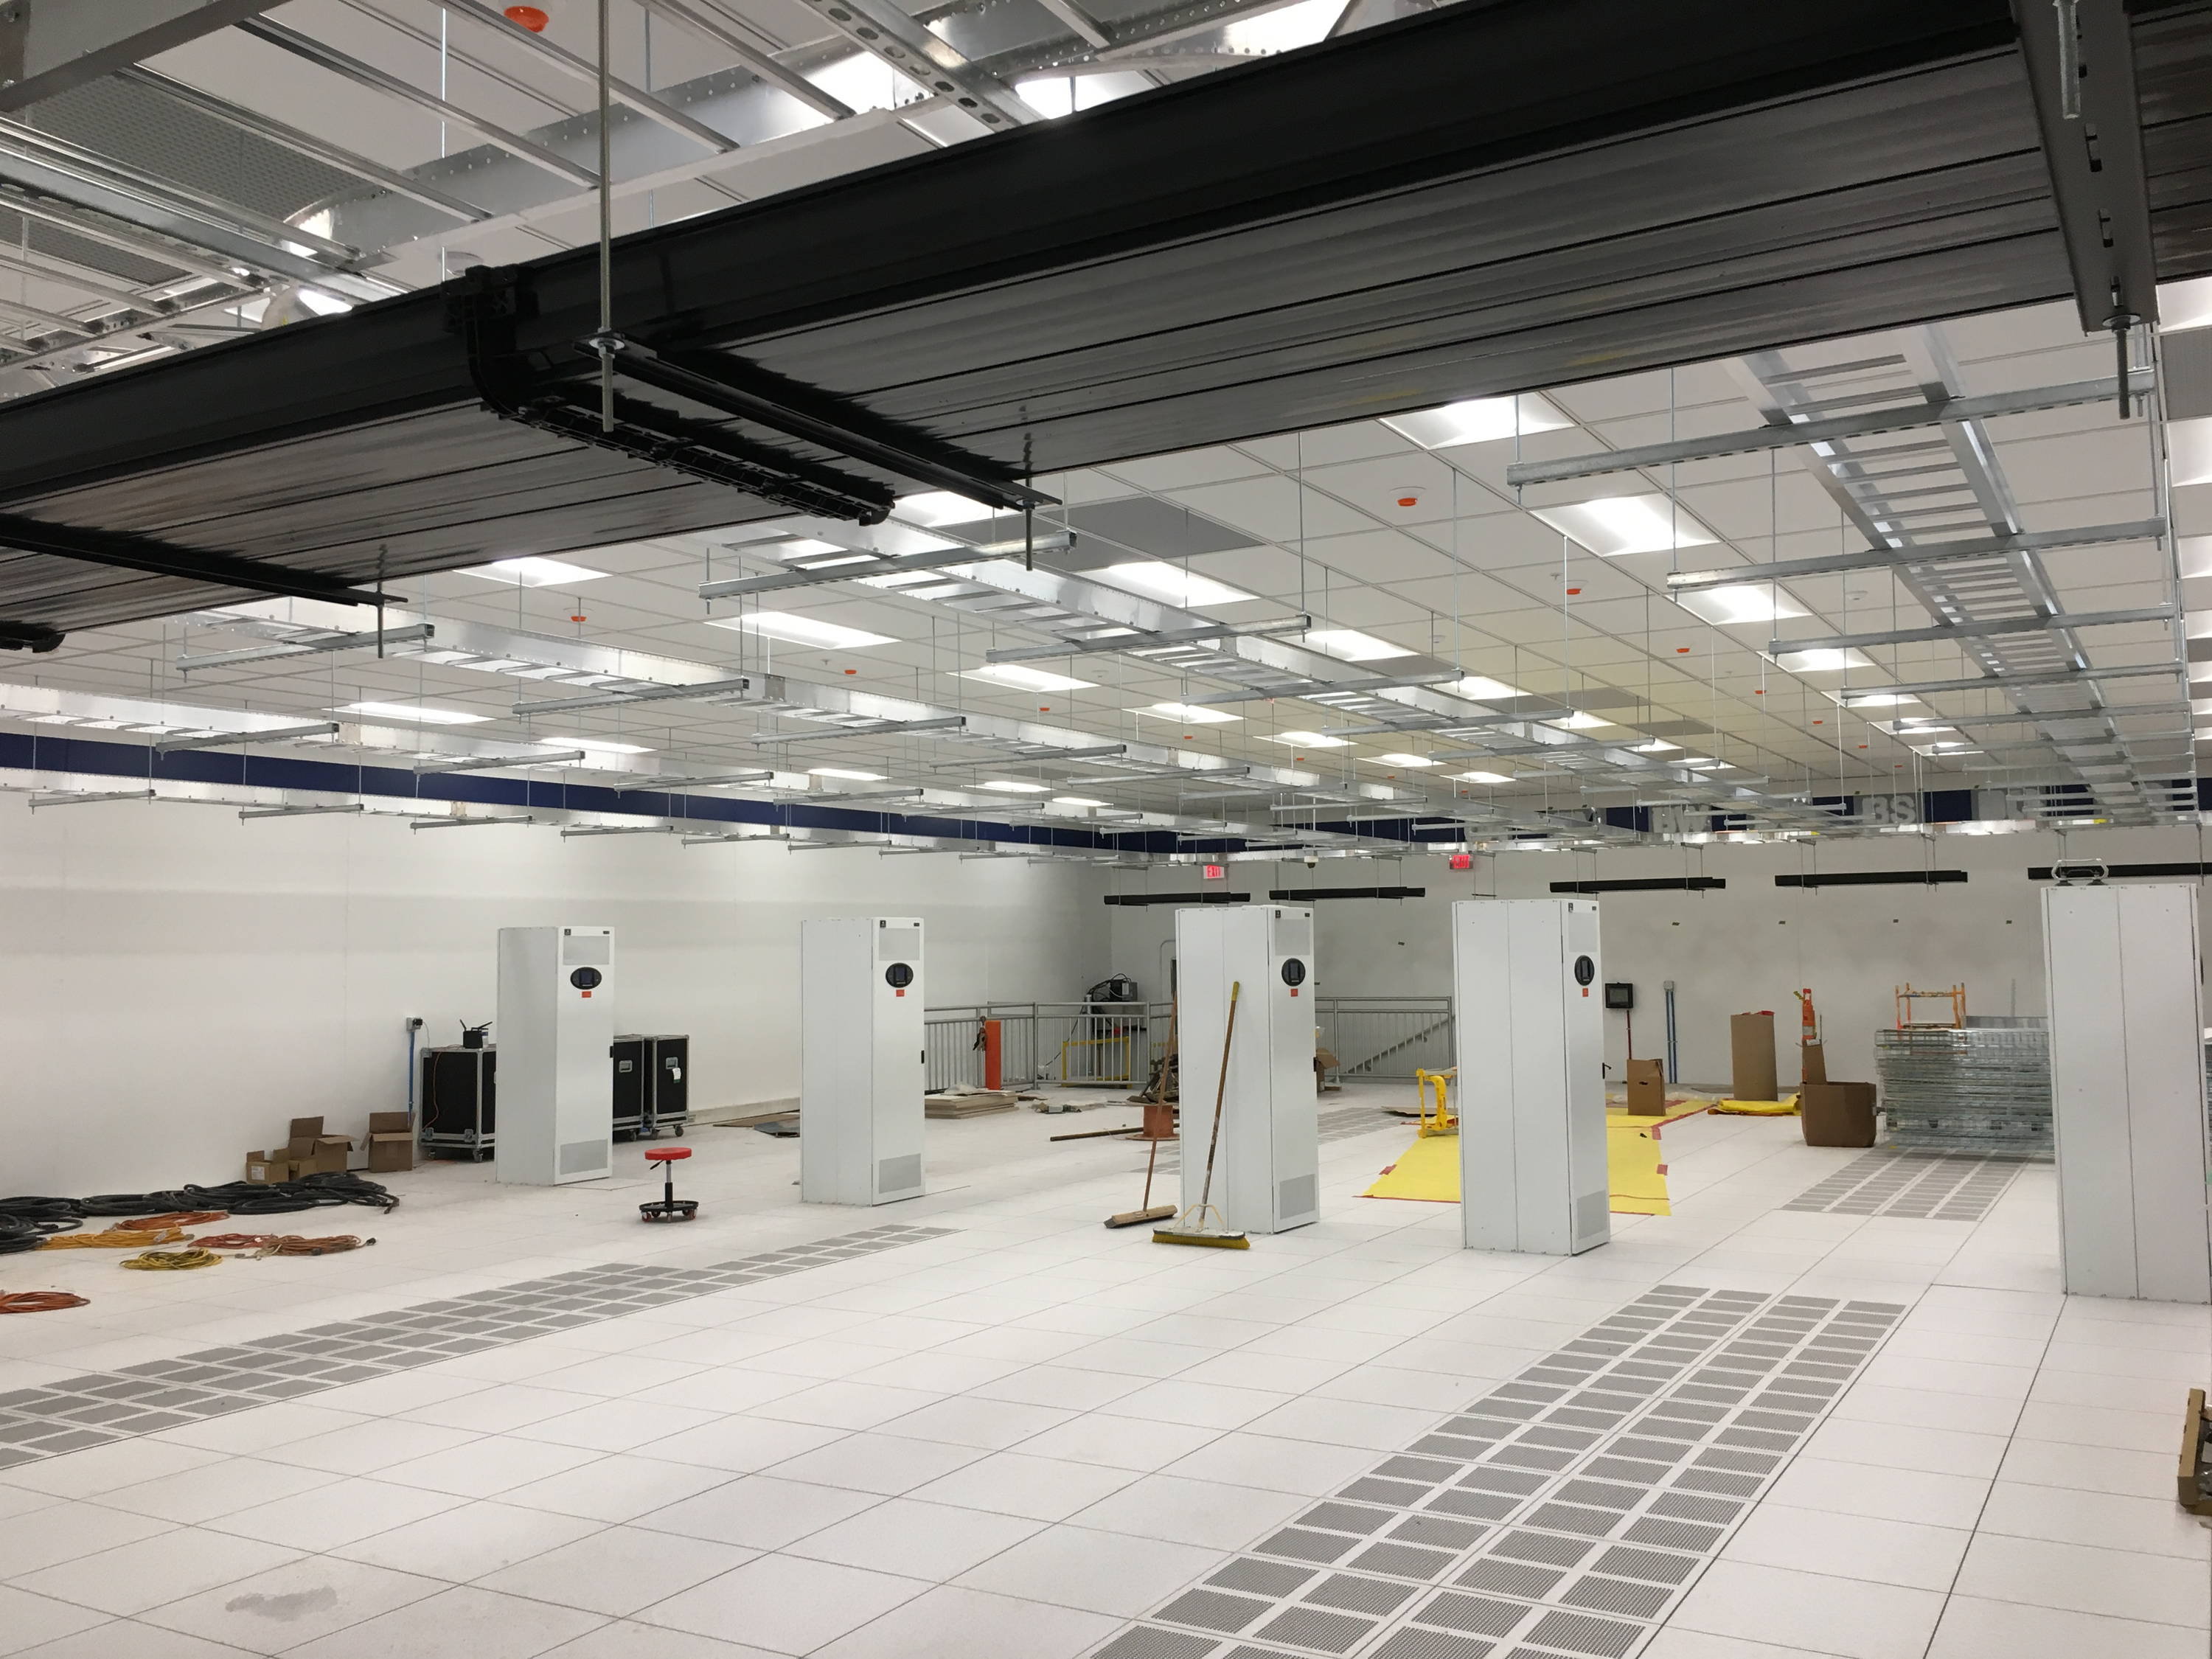 Tate access floors contribute to airflow within hot aisle containment systems and facilitate the separation of cold supply air from hot exhaust air through the use of perforated panels